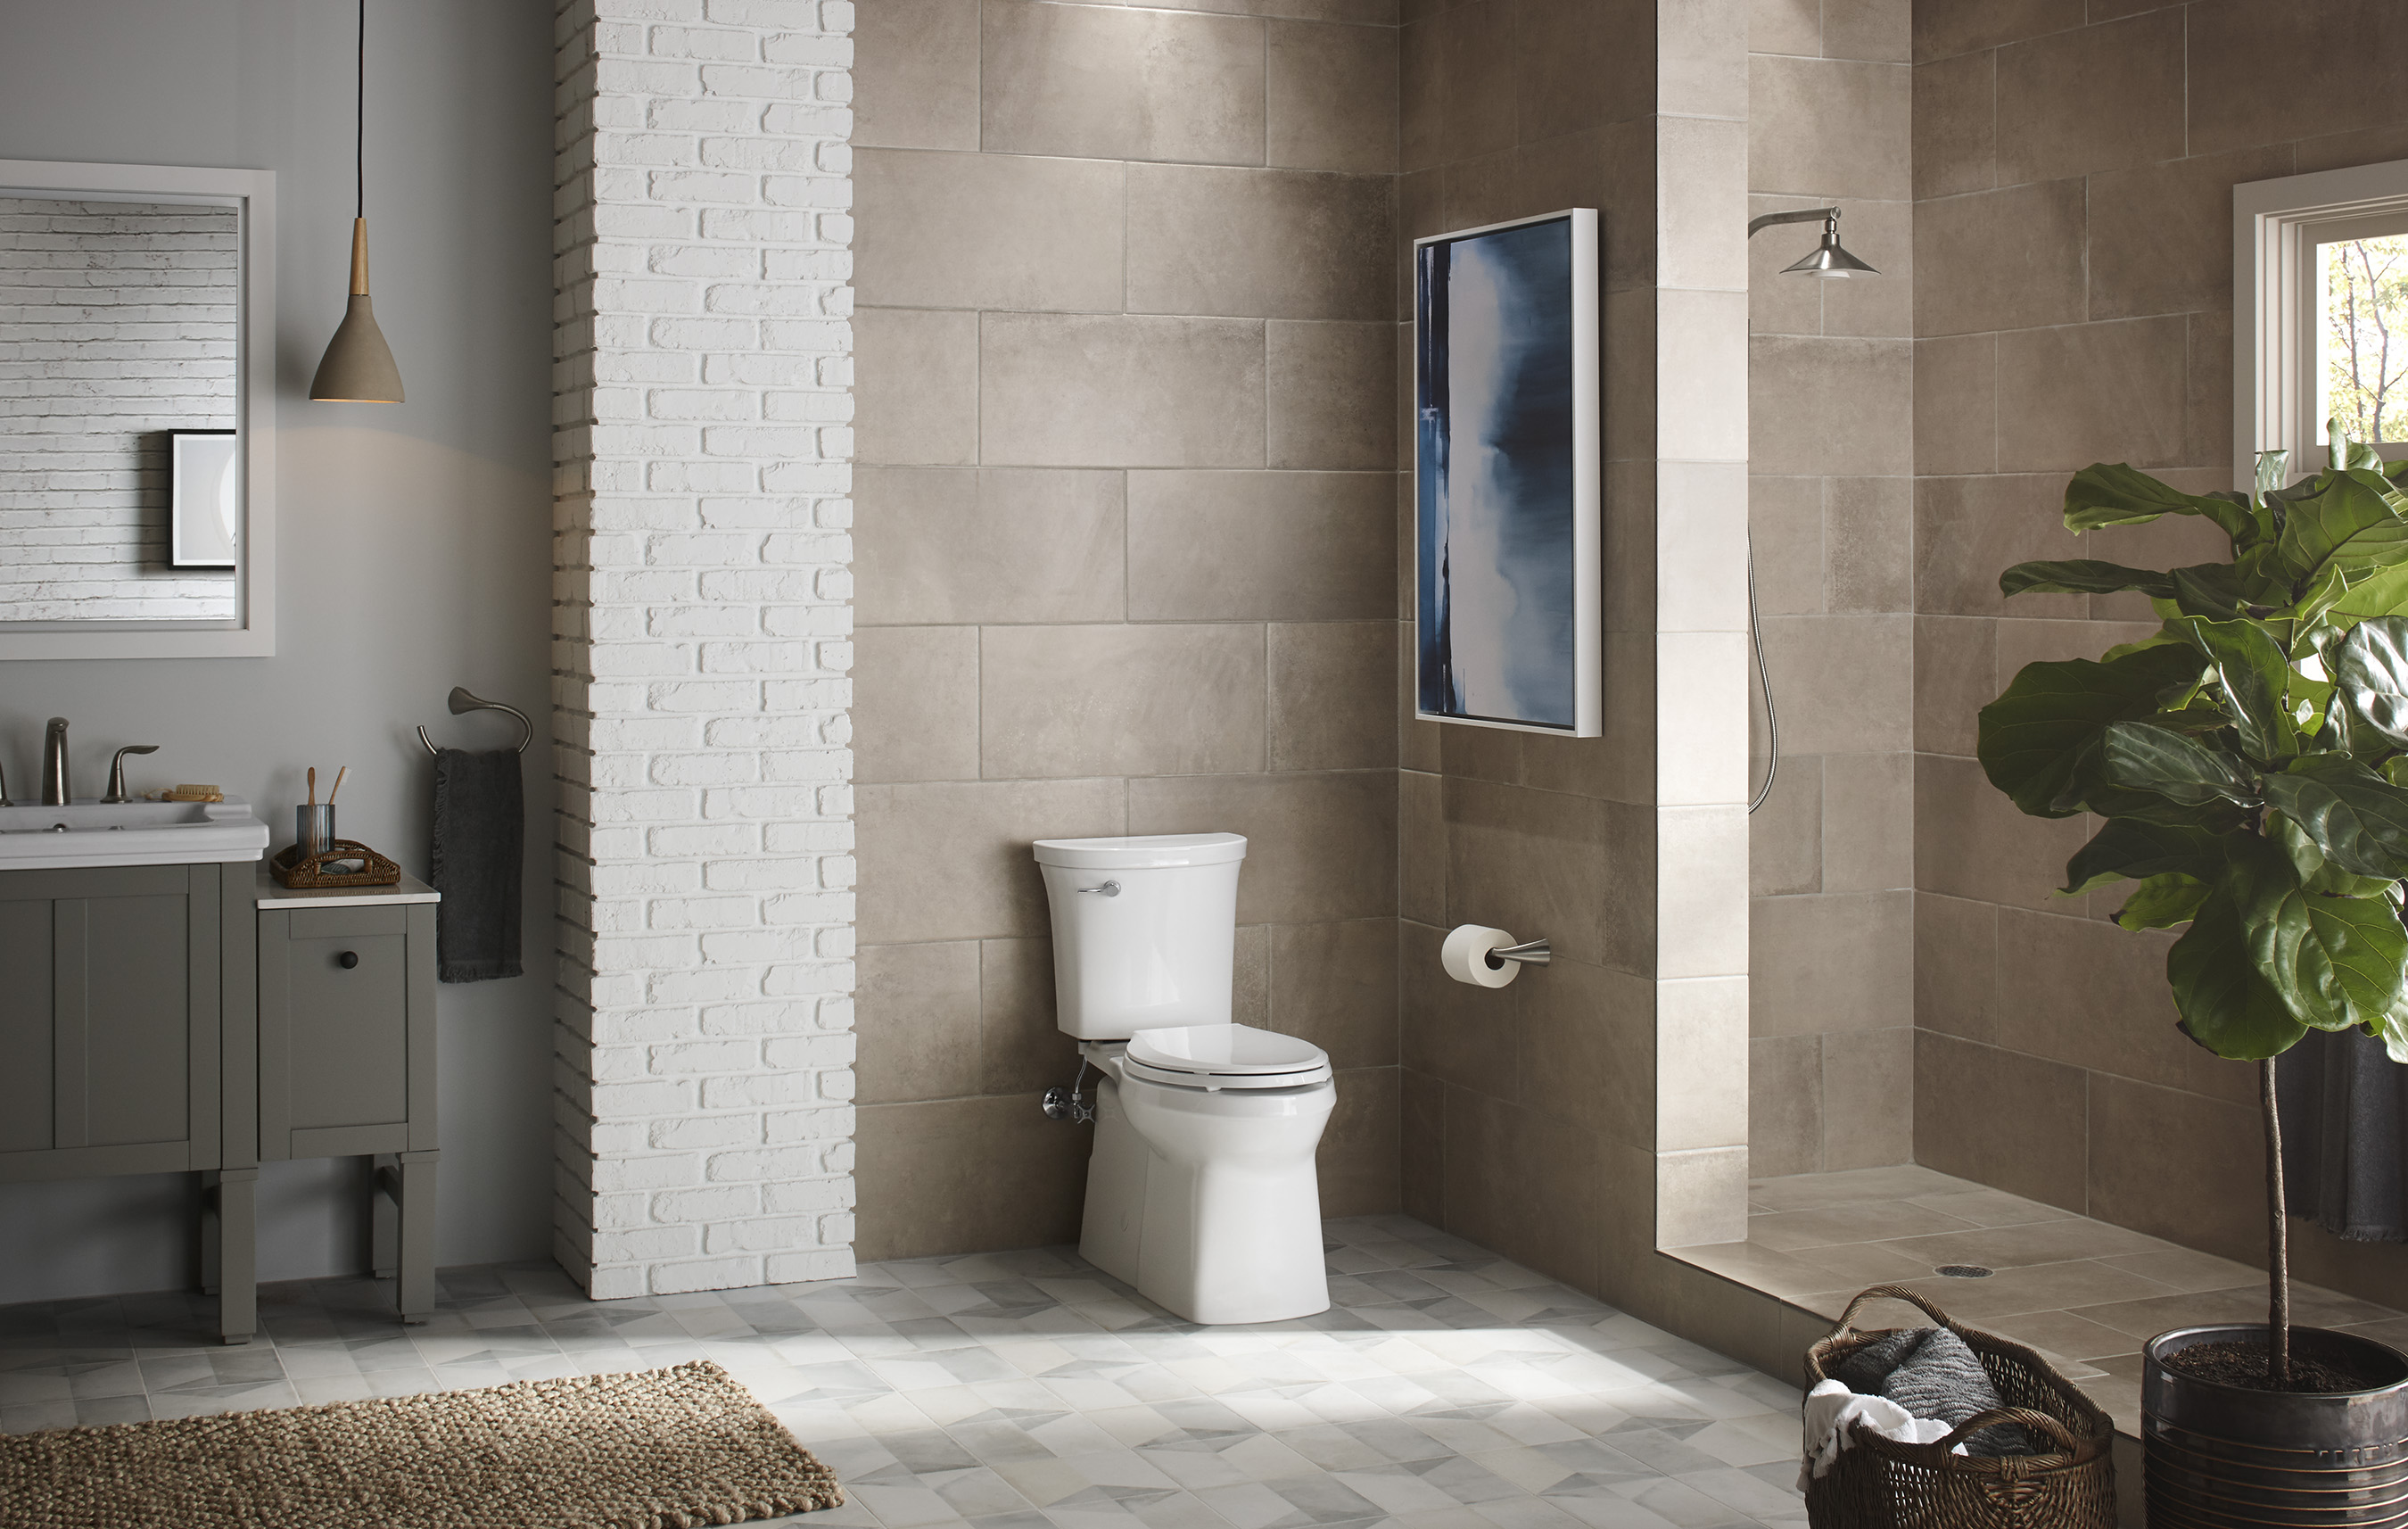 Kohler Corbelle toilet with Revolution 360 flush is powered by the AquaPiston canister technology which allows water to flow out of the tank at 360 degrees, increasing the power and effectiveness of the flush.